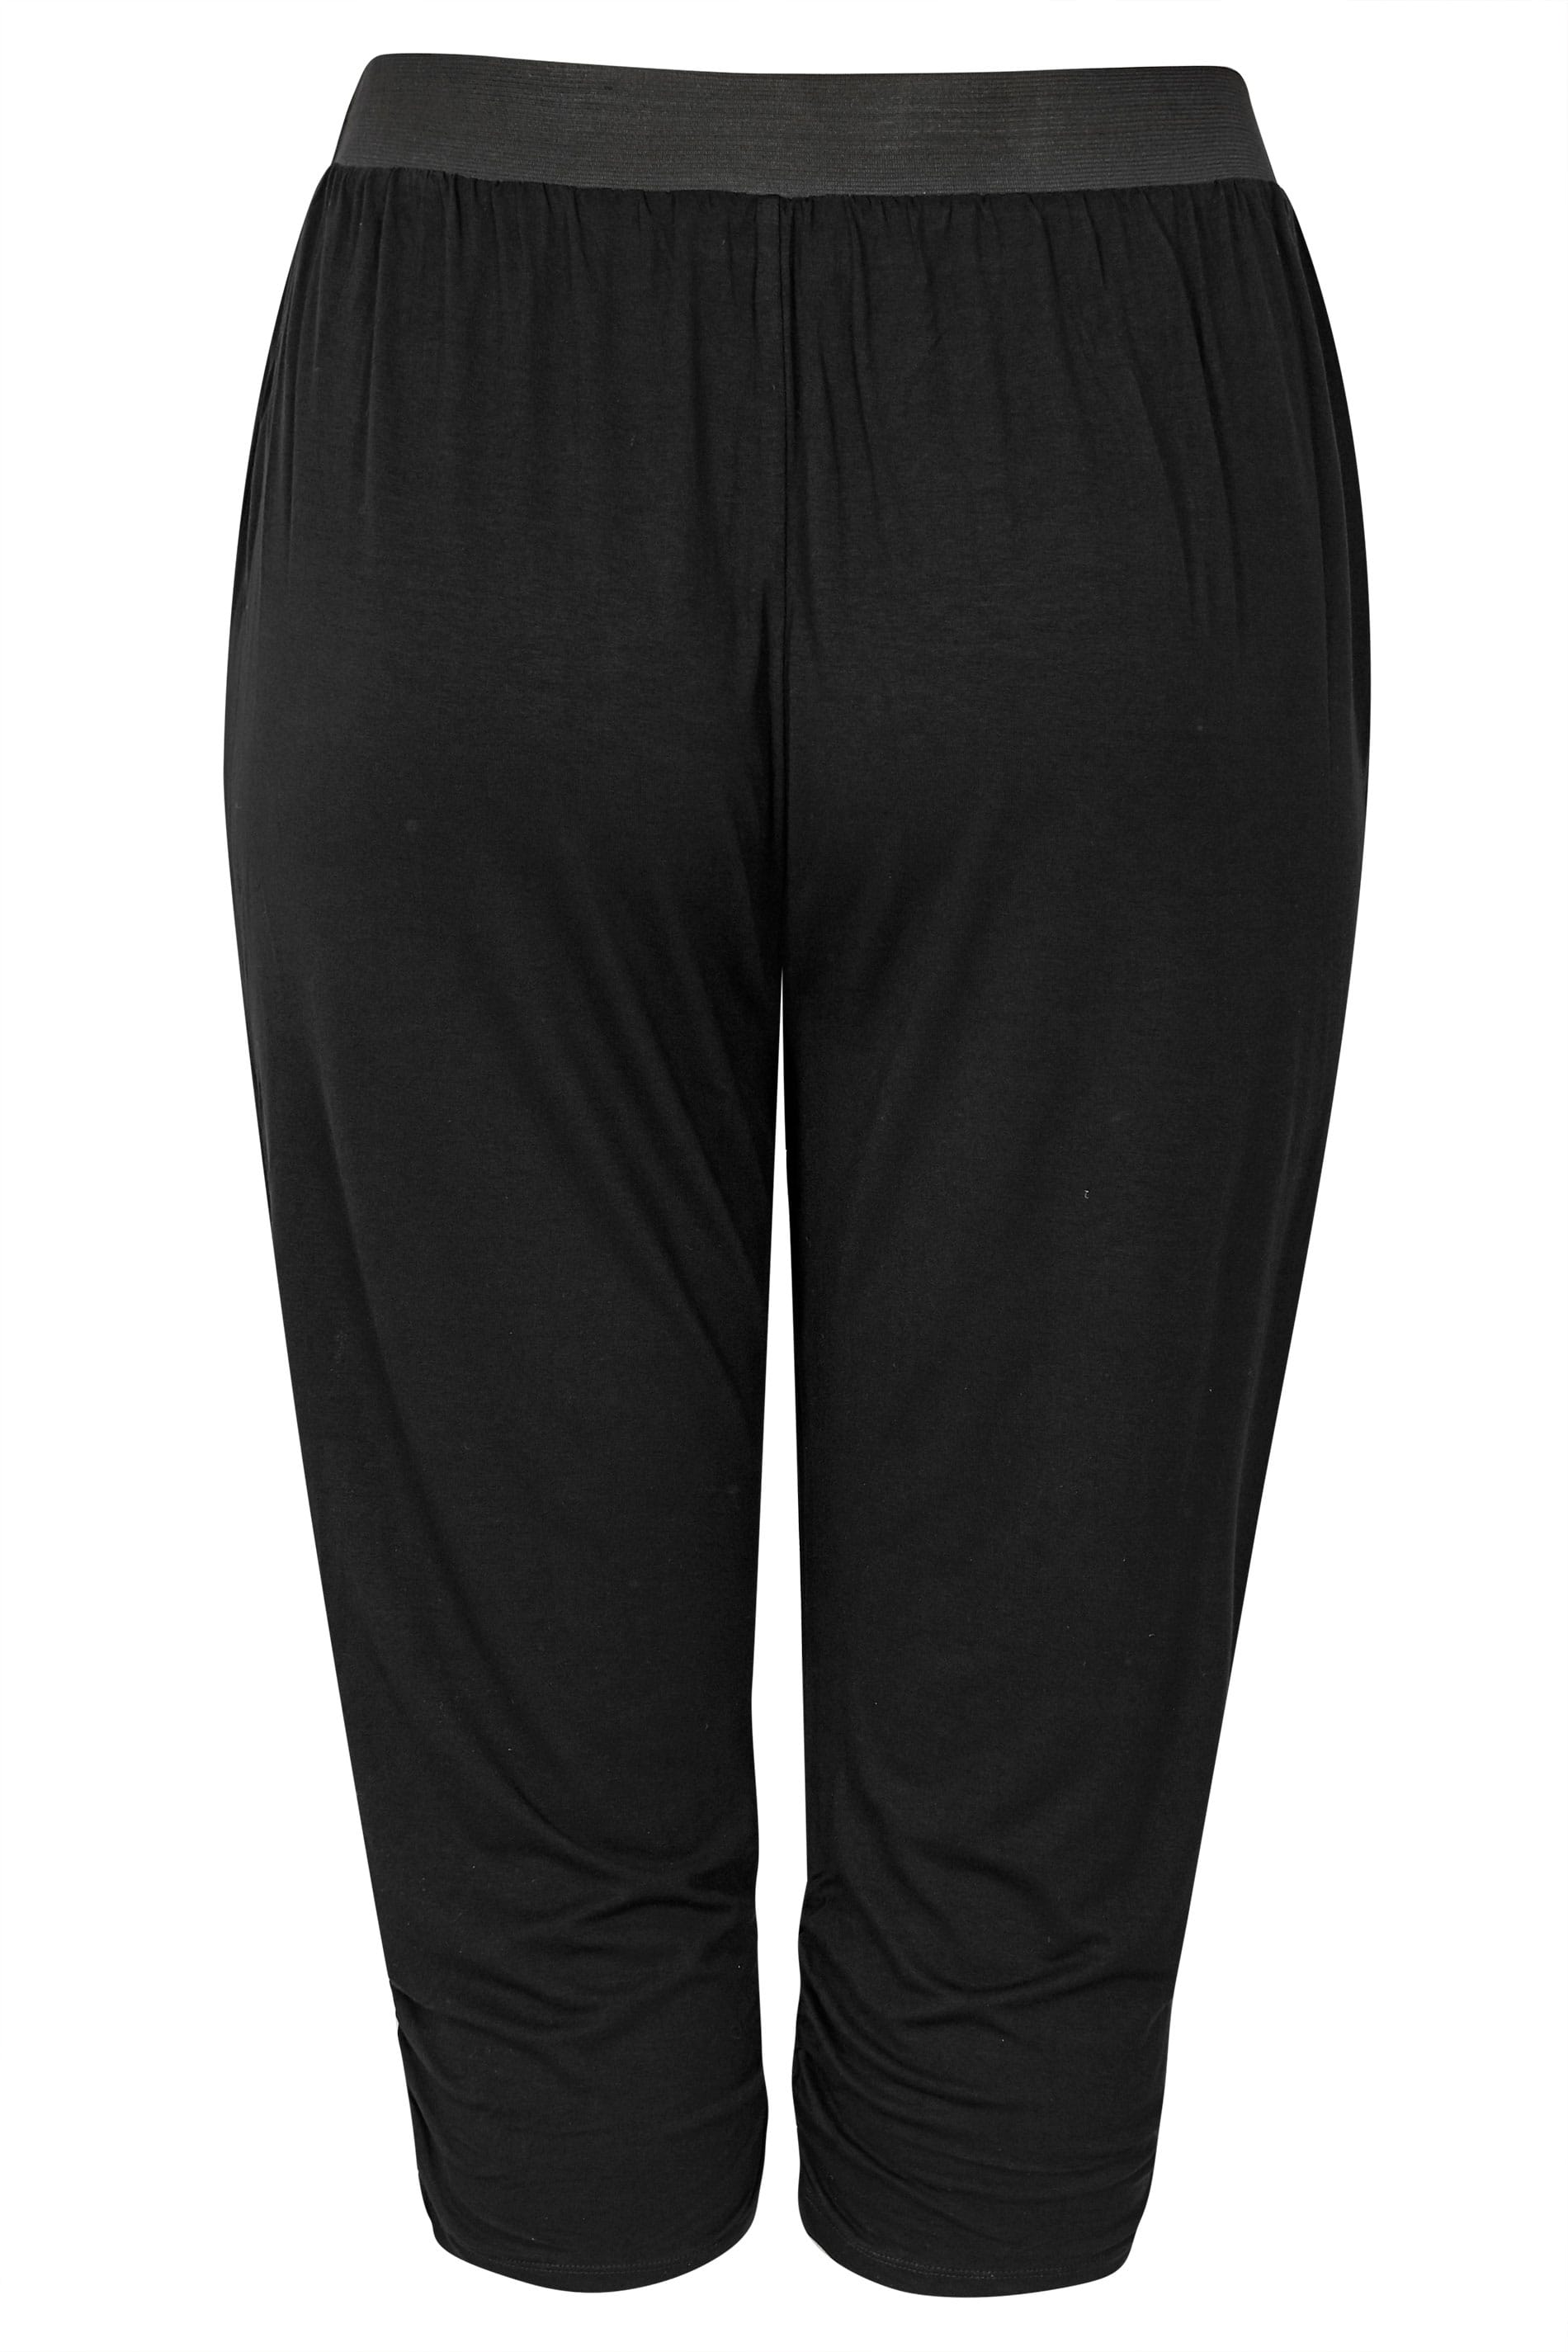 Black Cropped Harem Trousers | Plus Sizes 16 to 36 | Yours Clothing